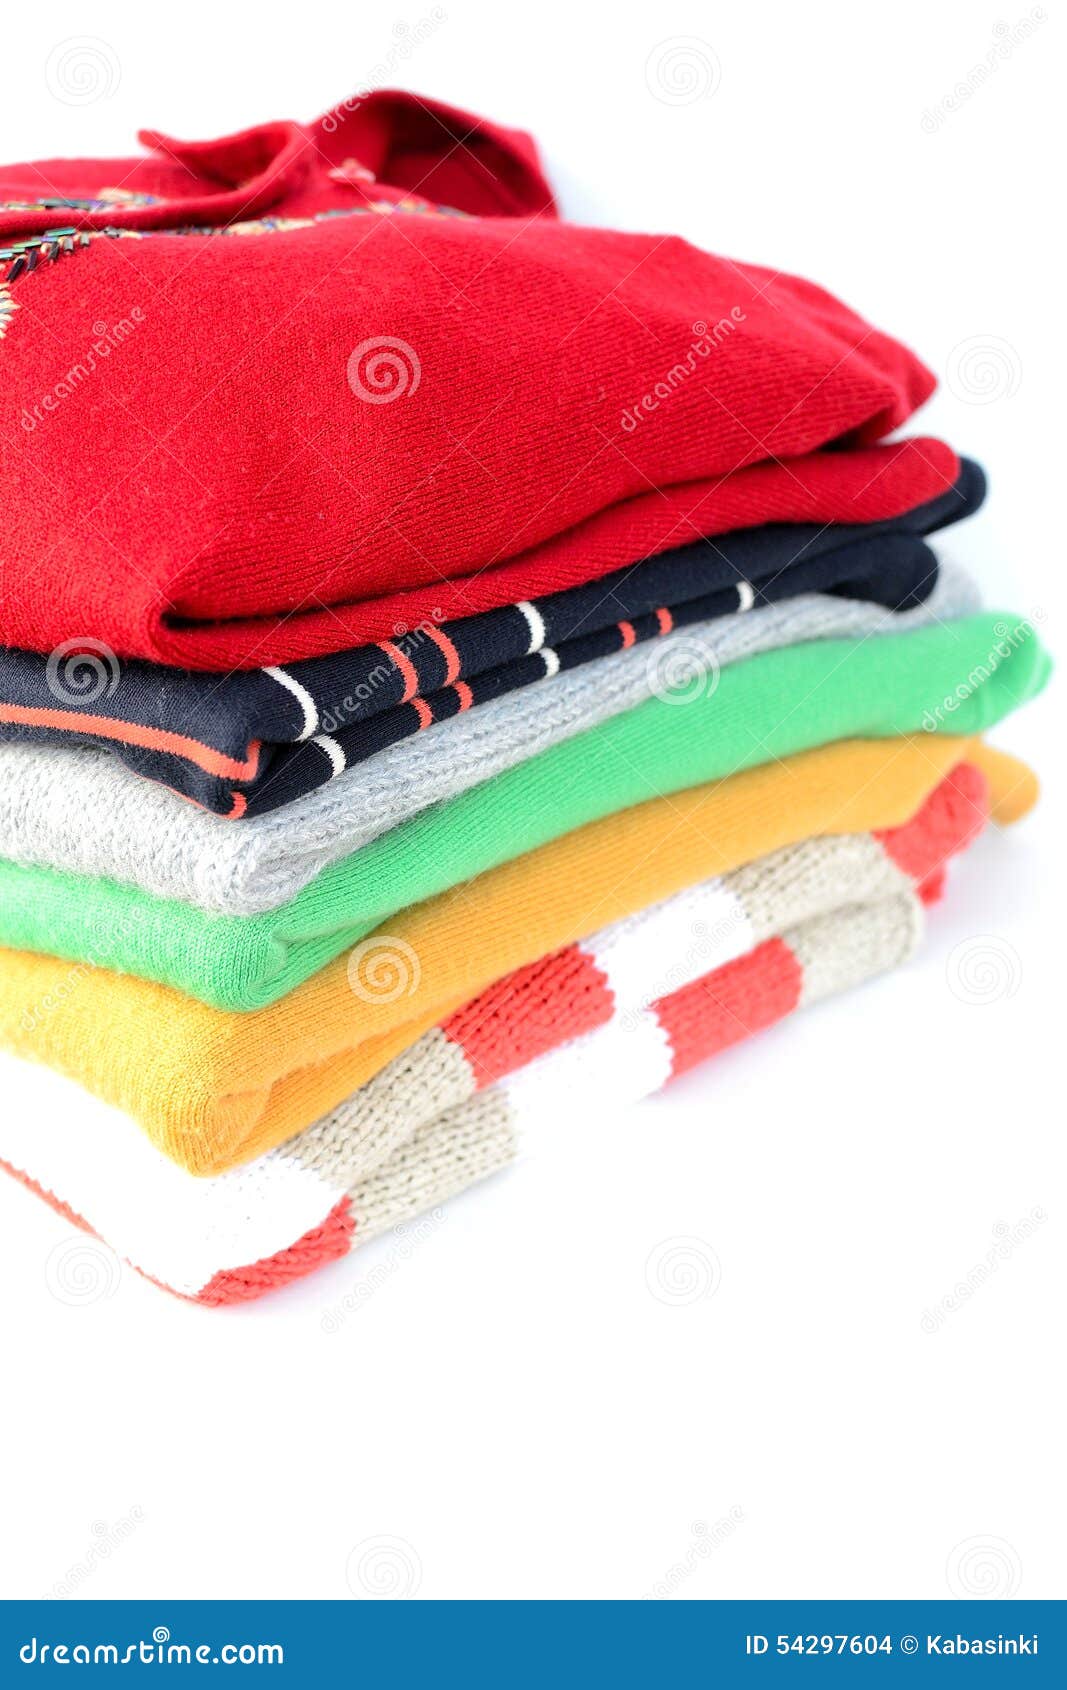 Stack of sweaters stock photo. Image of clothes, pile - 54297604